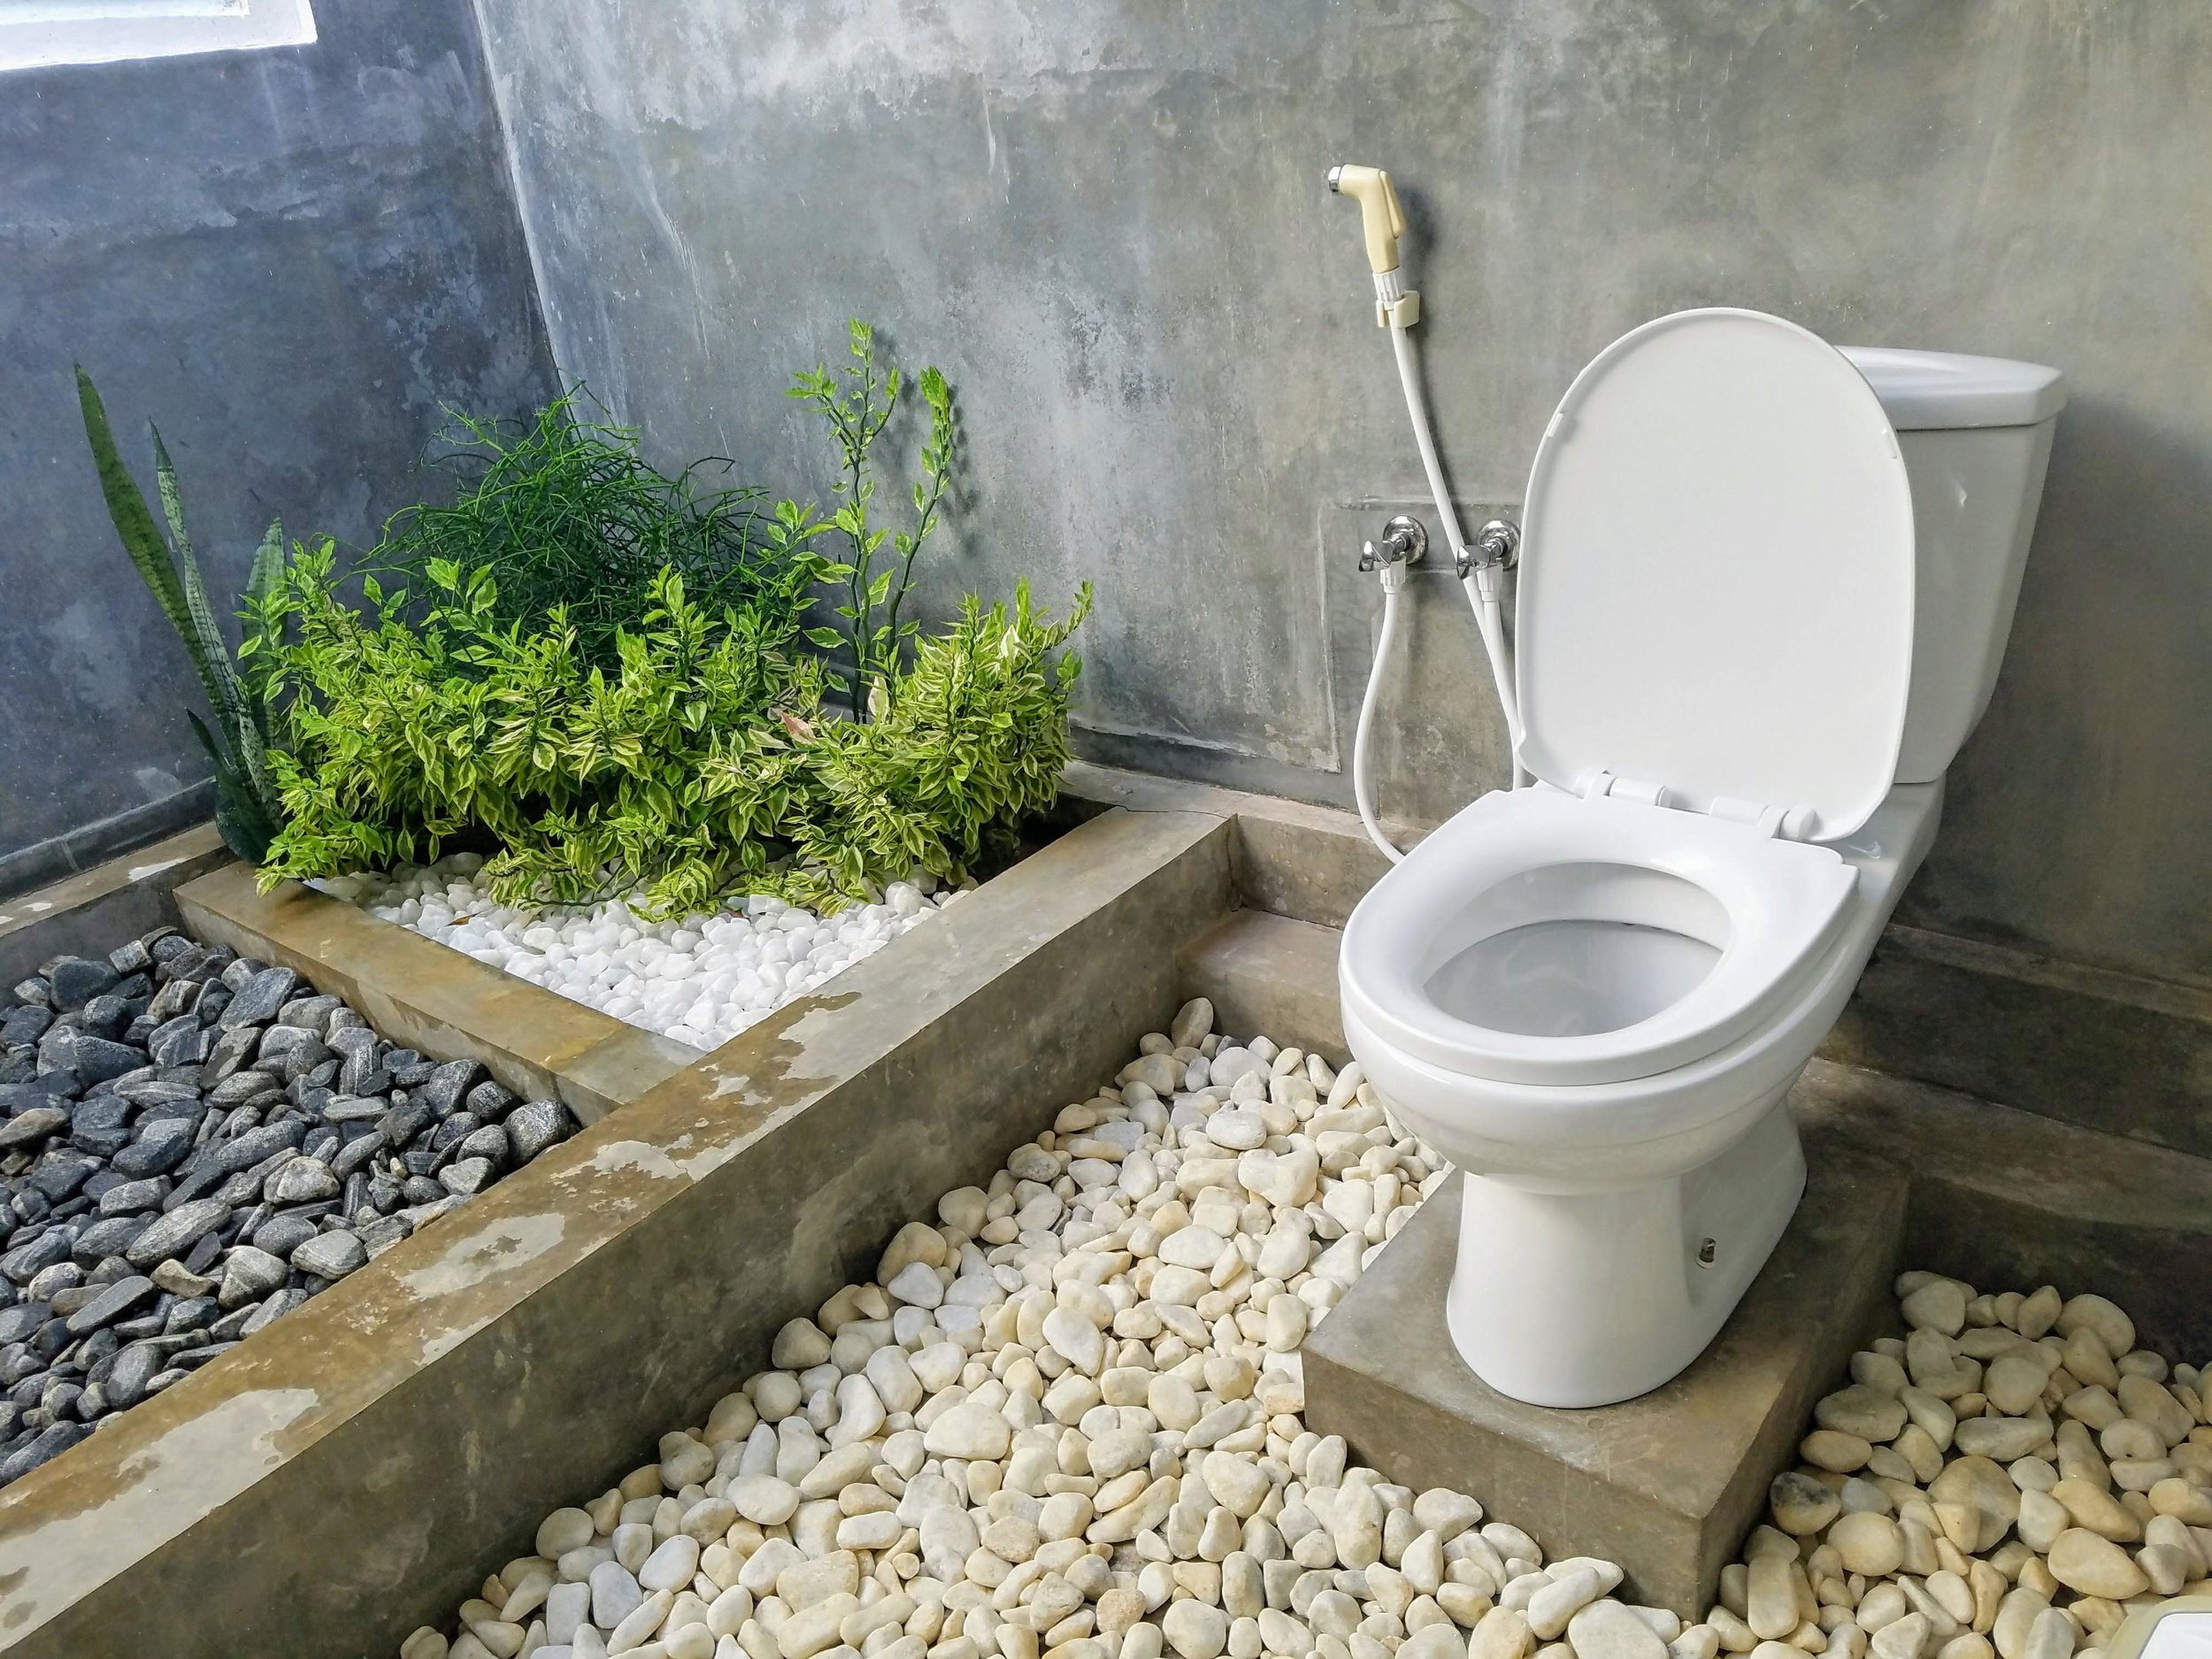   Seated flush toilet with a hose in Sri Lanka  